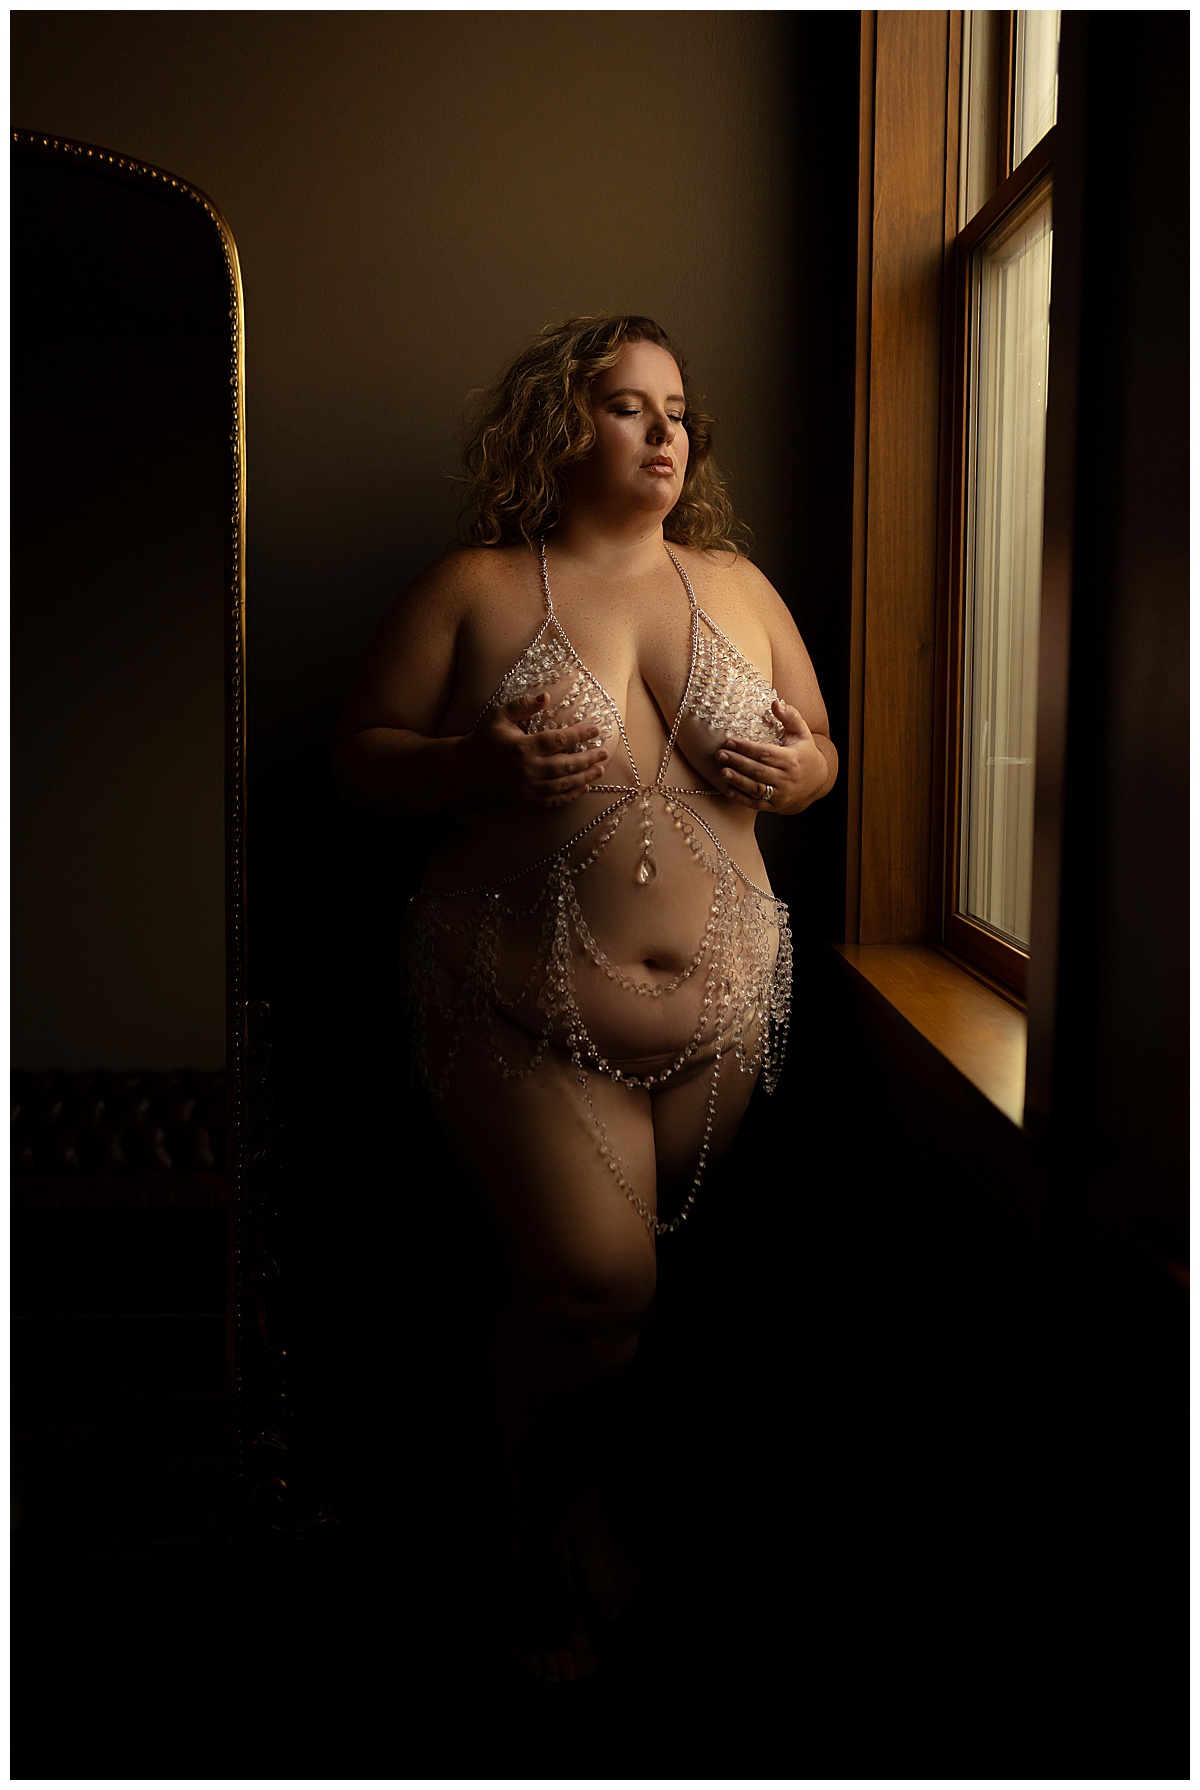 Adult covers her chest with her hands for Sioux Falls Boudoir Photographer